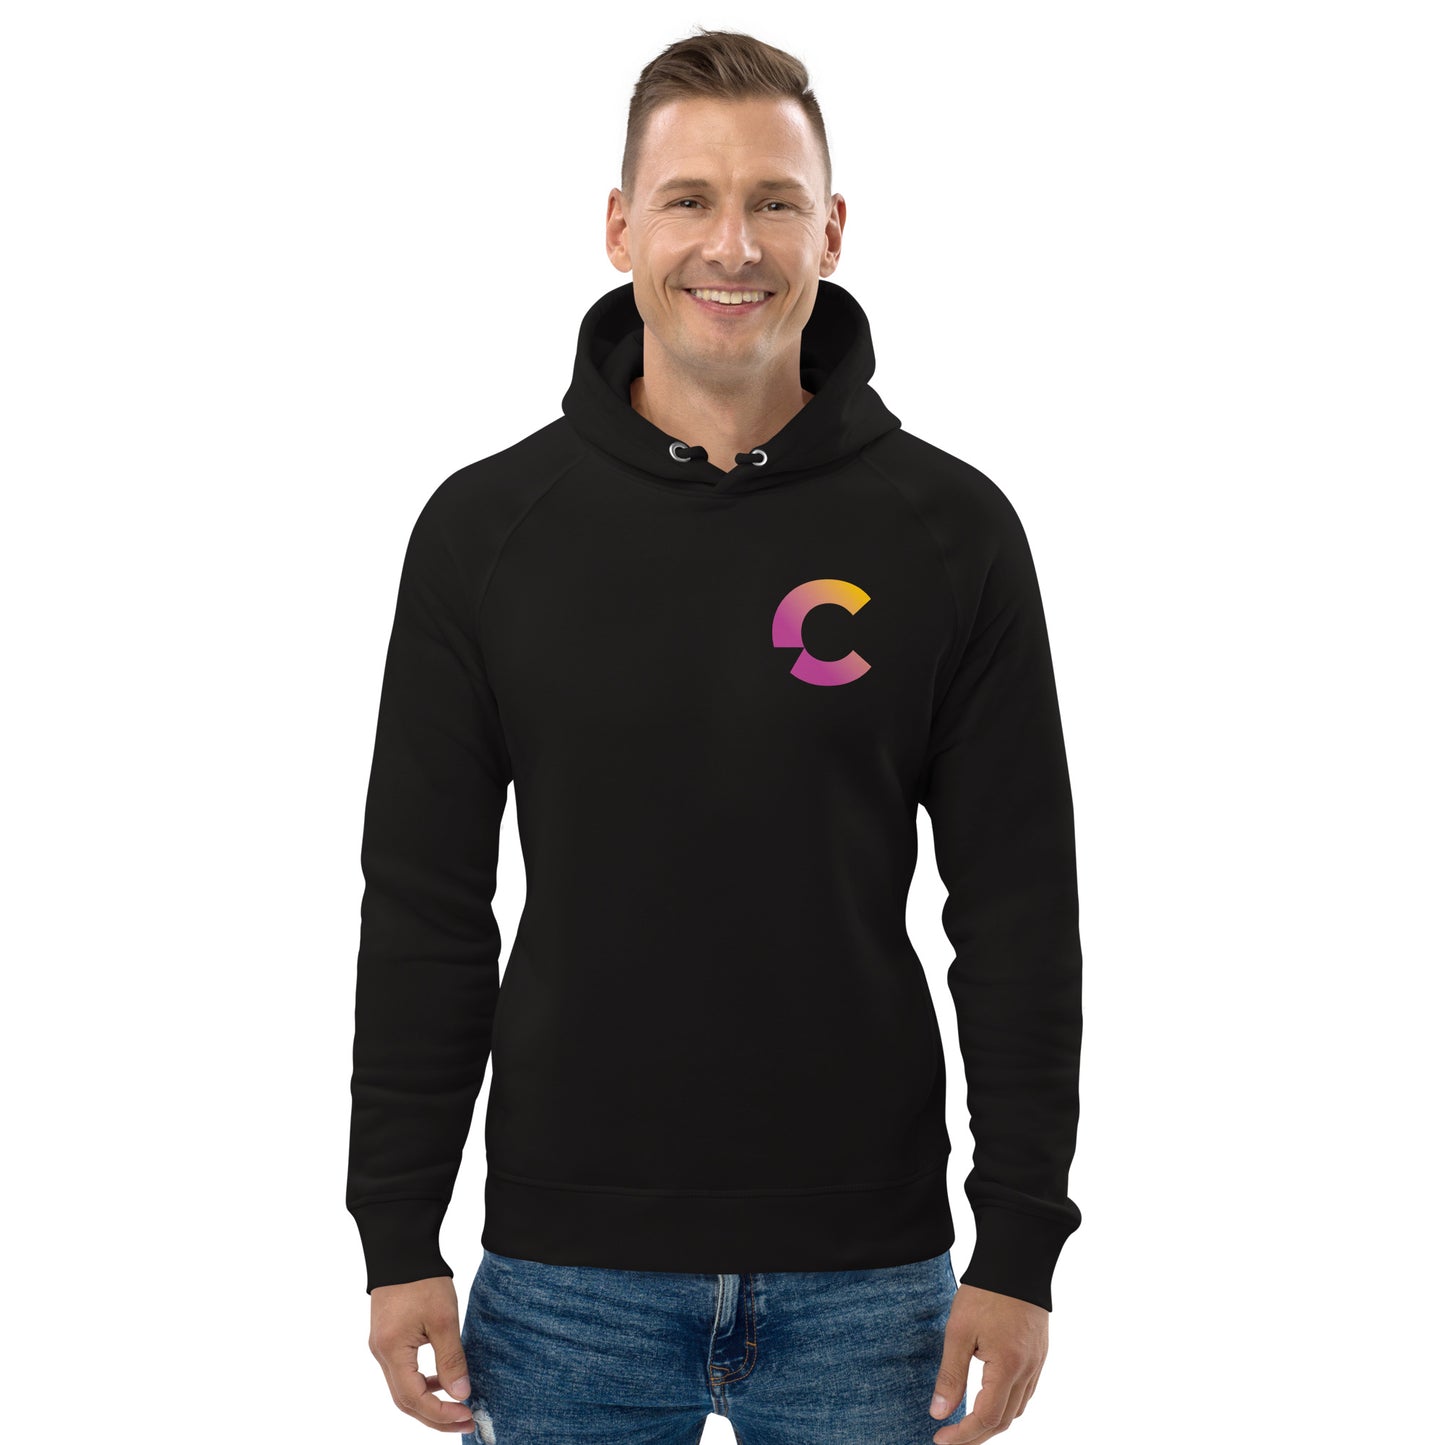 Cool Caring Coach Unisex Eco Hoodie (Black)